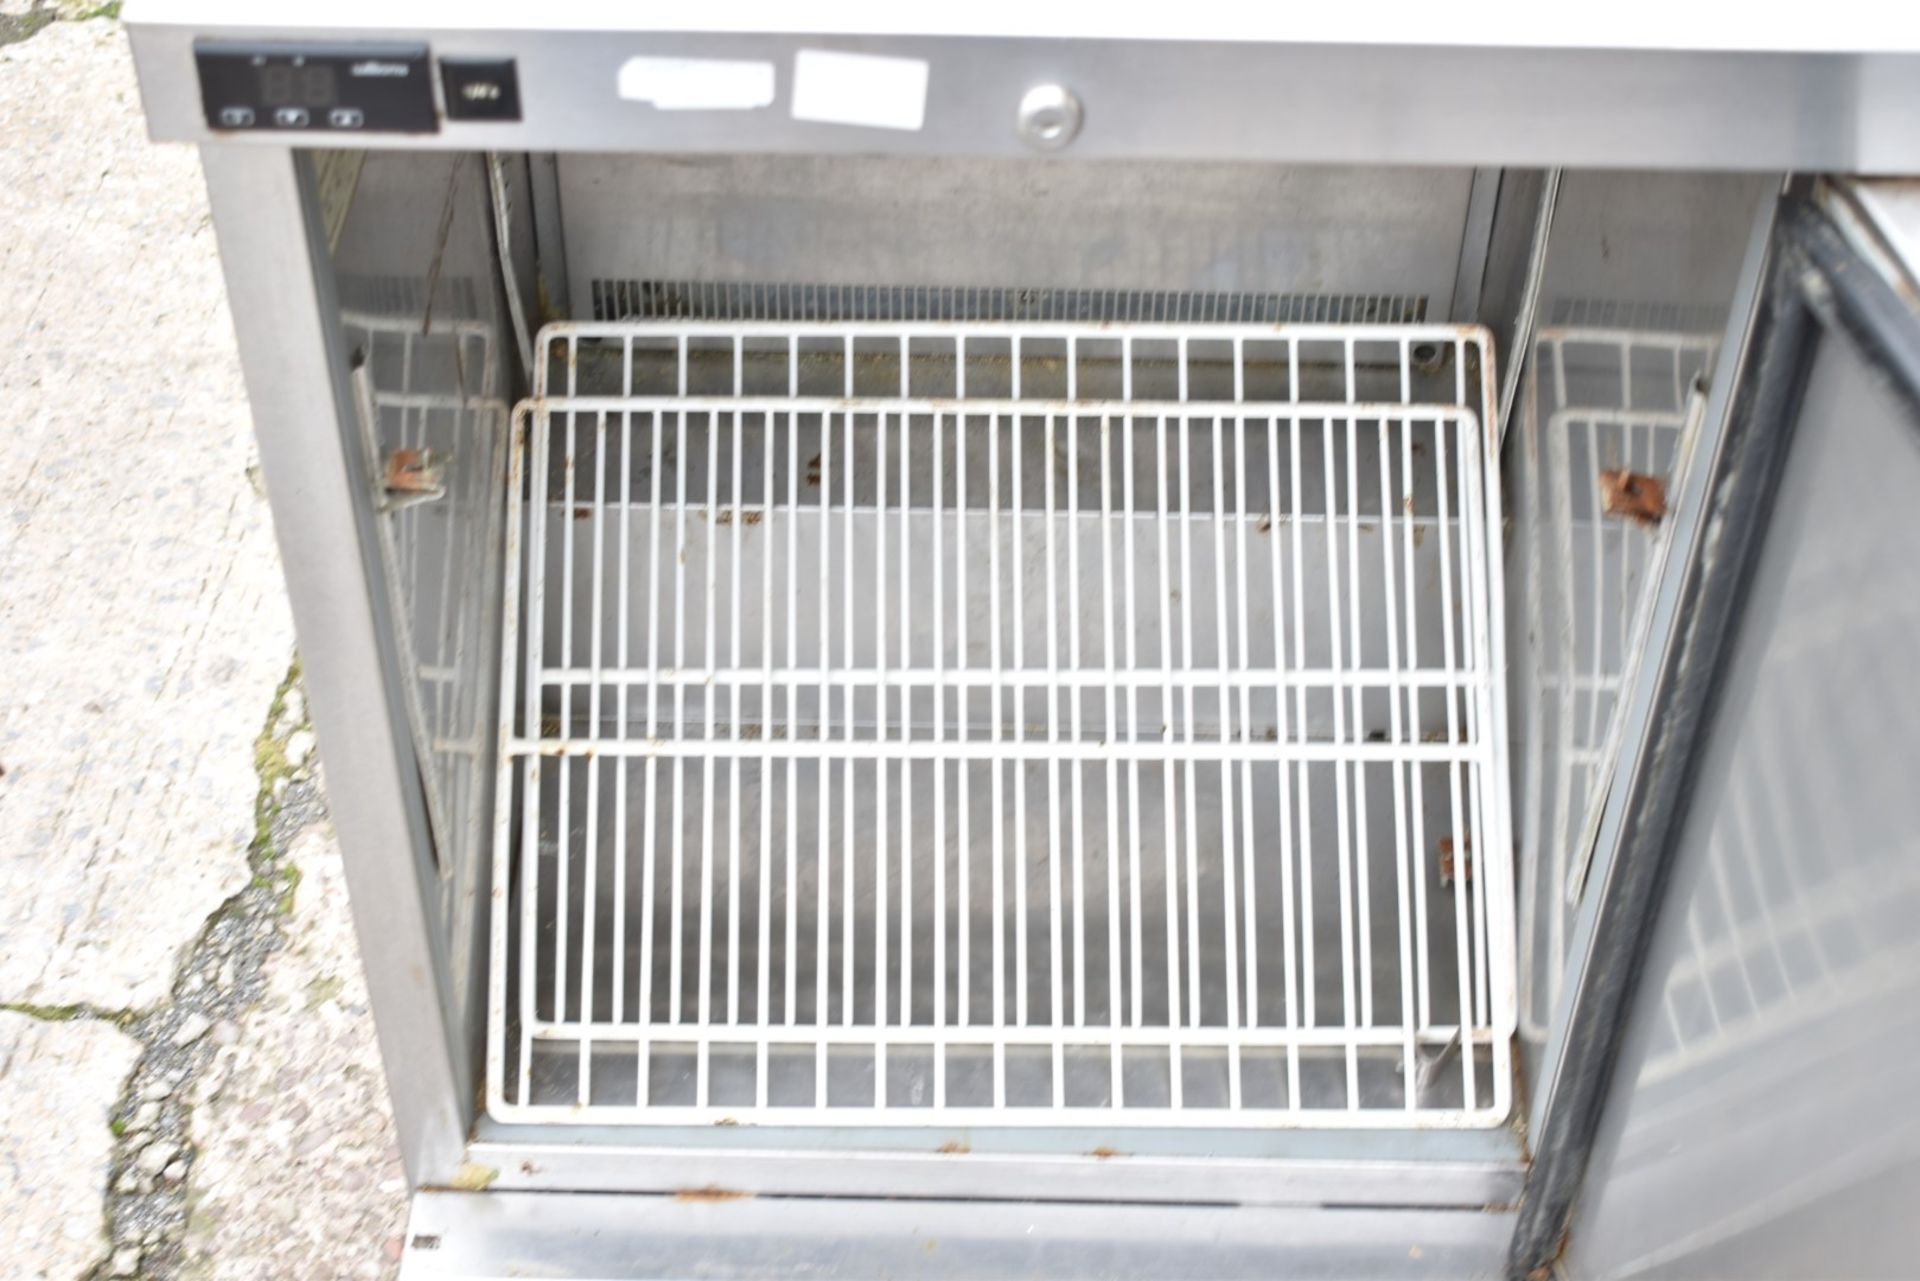 1 x Williams Single Door Under Counter Fridge - H82.5 x W65 x D65 cms - Stainless Steel Exterior - - Image 4 of 5